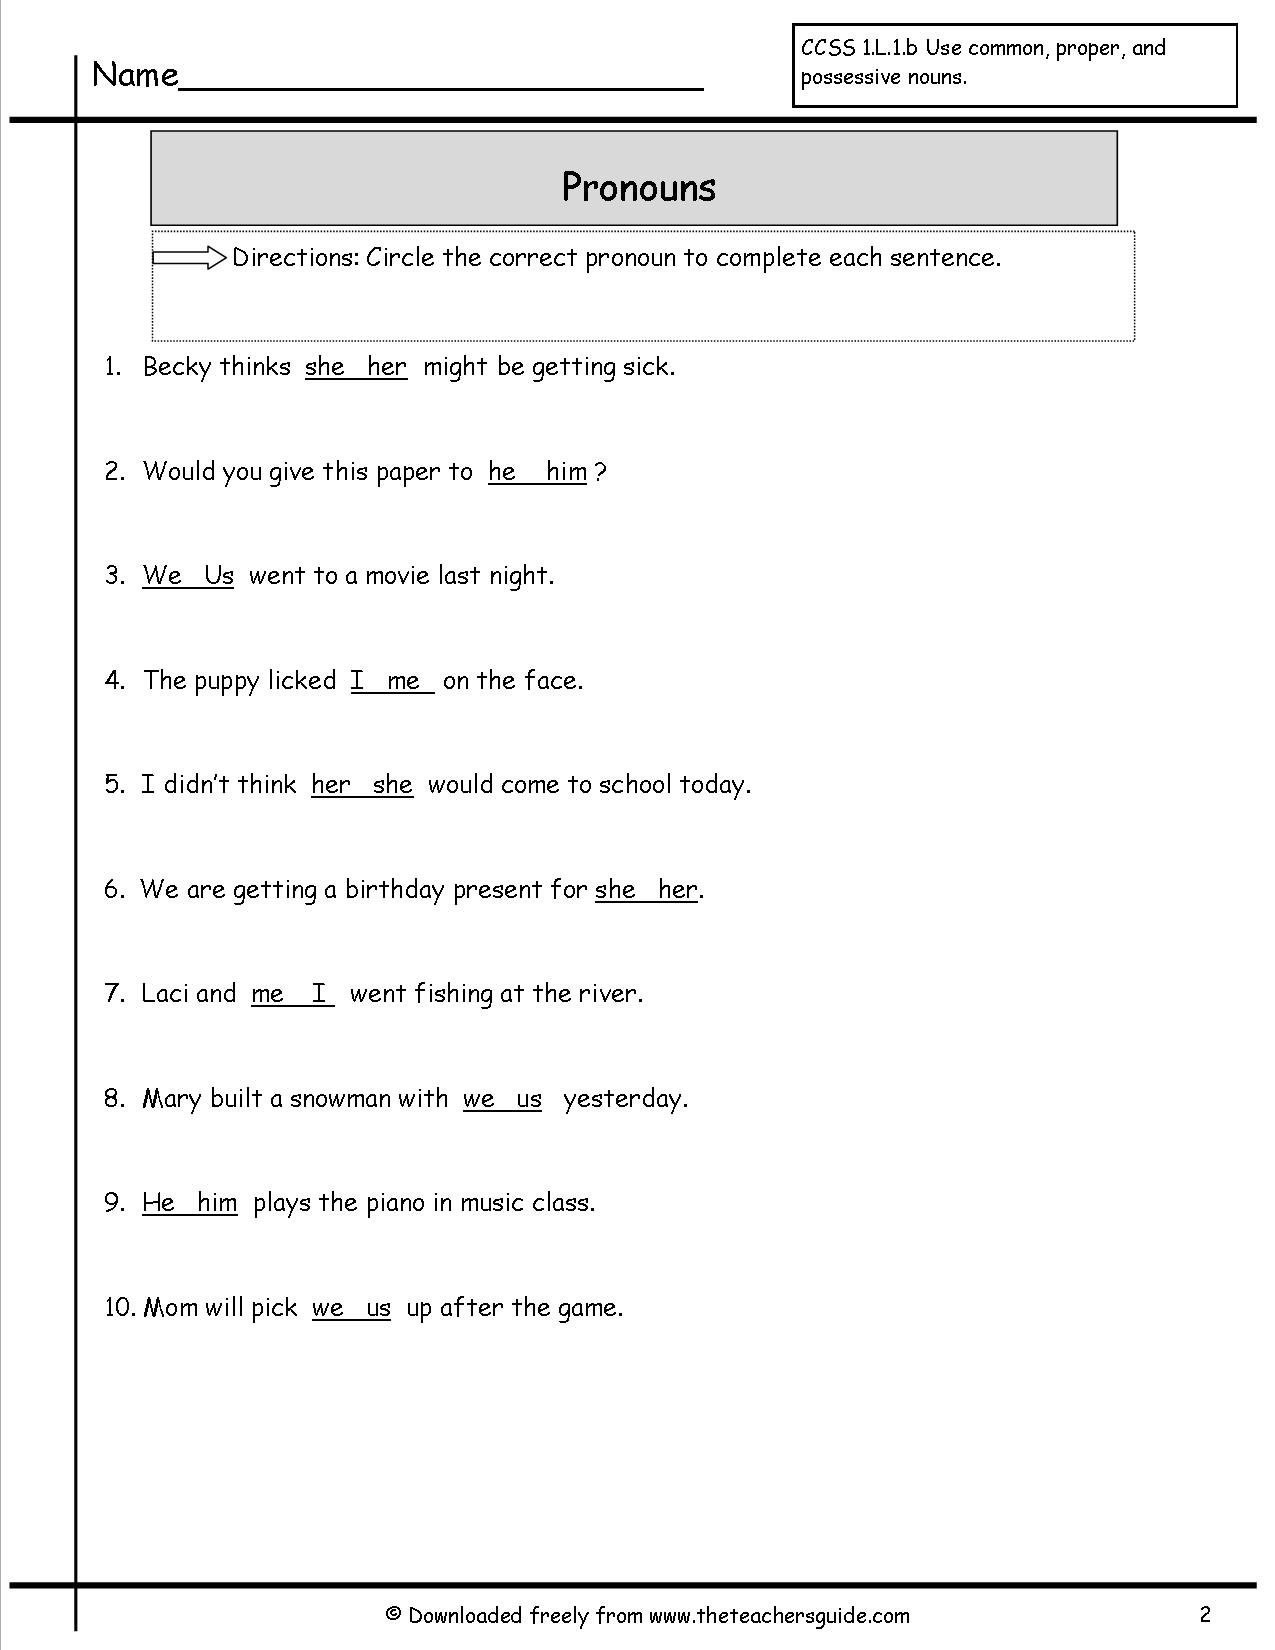 15 Best Images of Pronouns Worksheets With Answers - Subject Pronouns